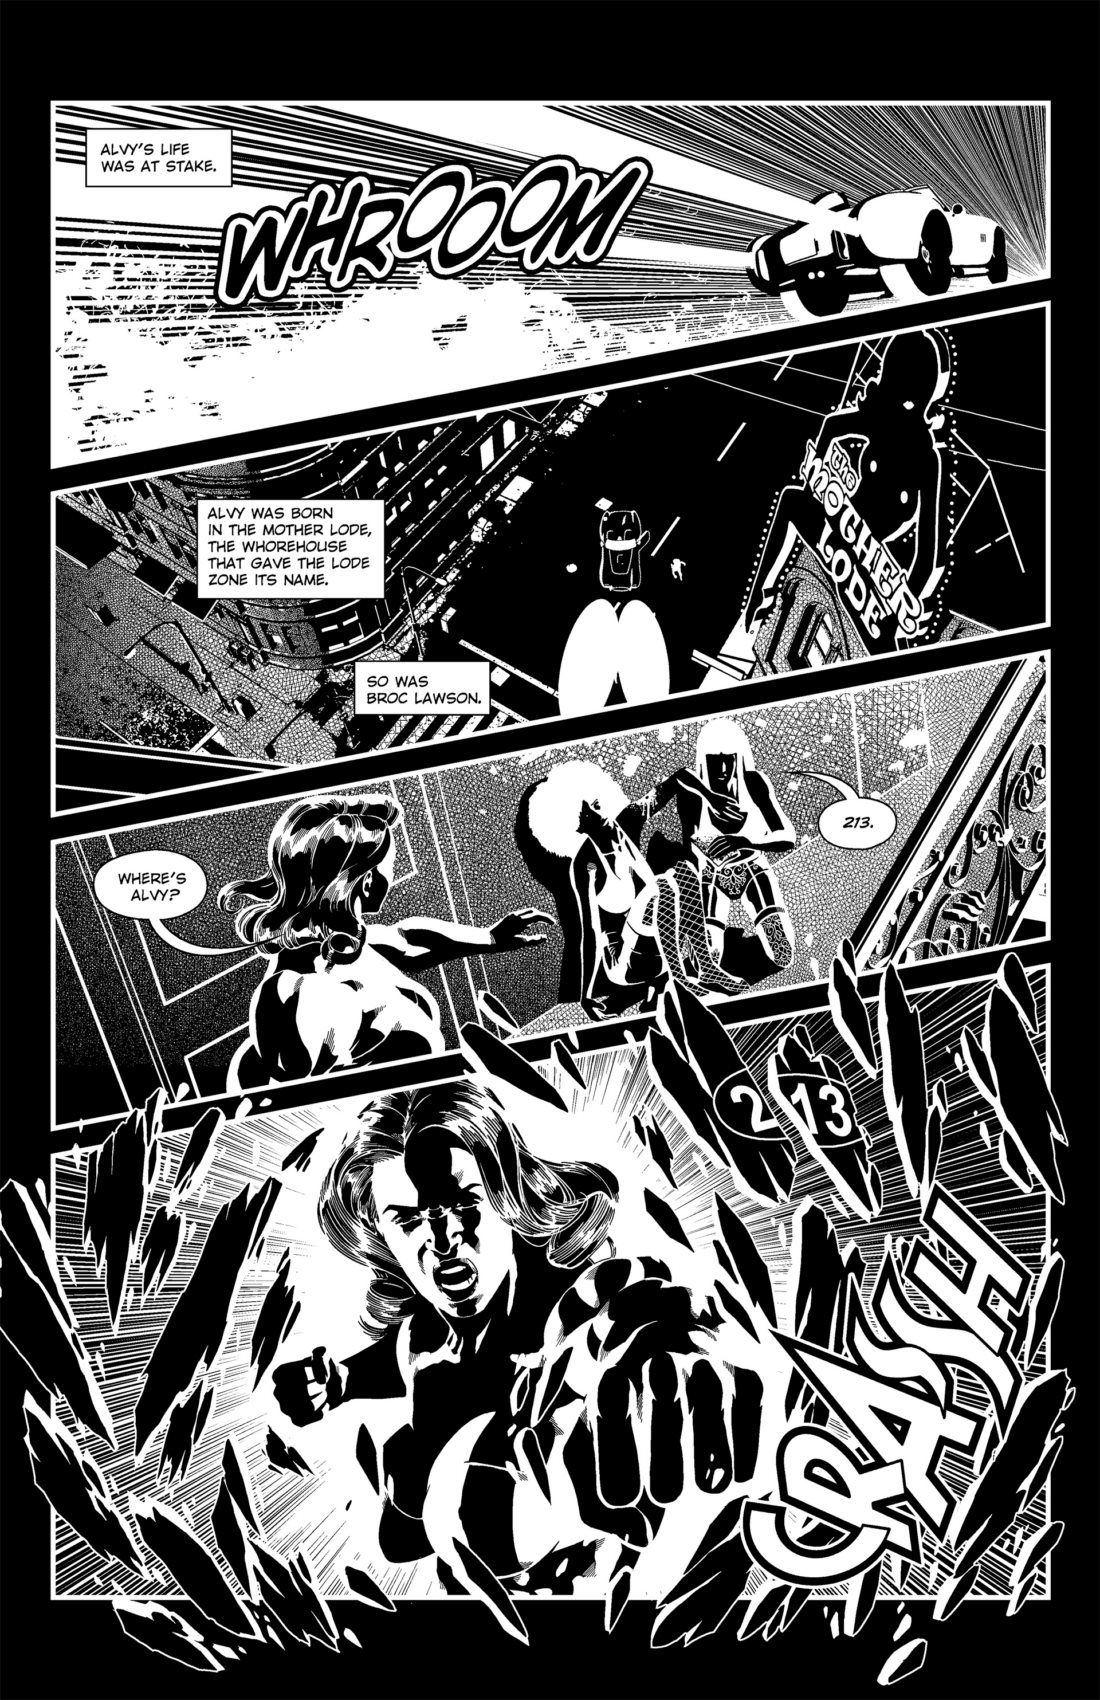 Stone Cold Issue 1 MuscleFan page 22